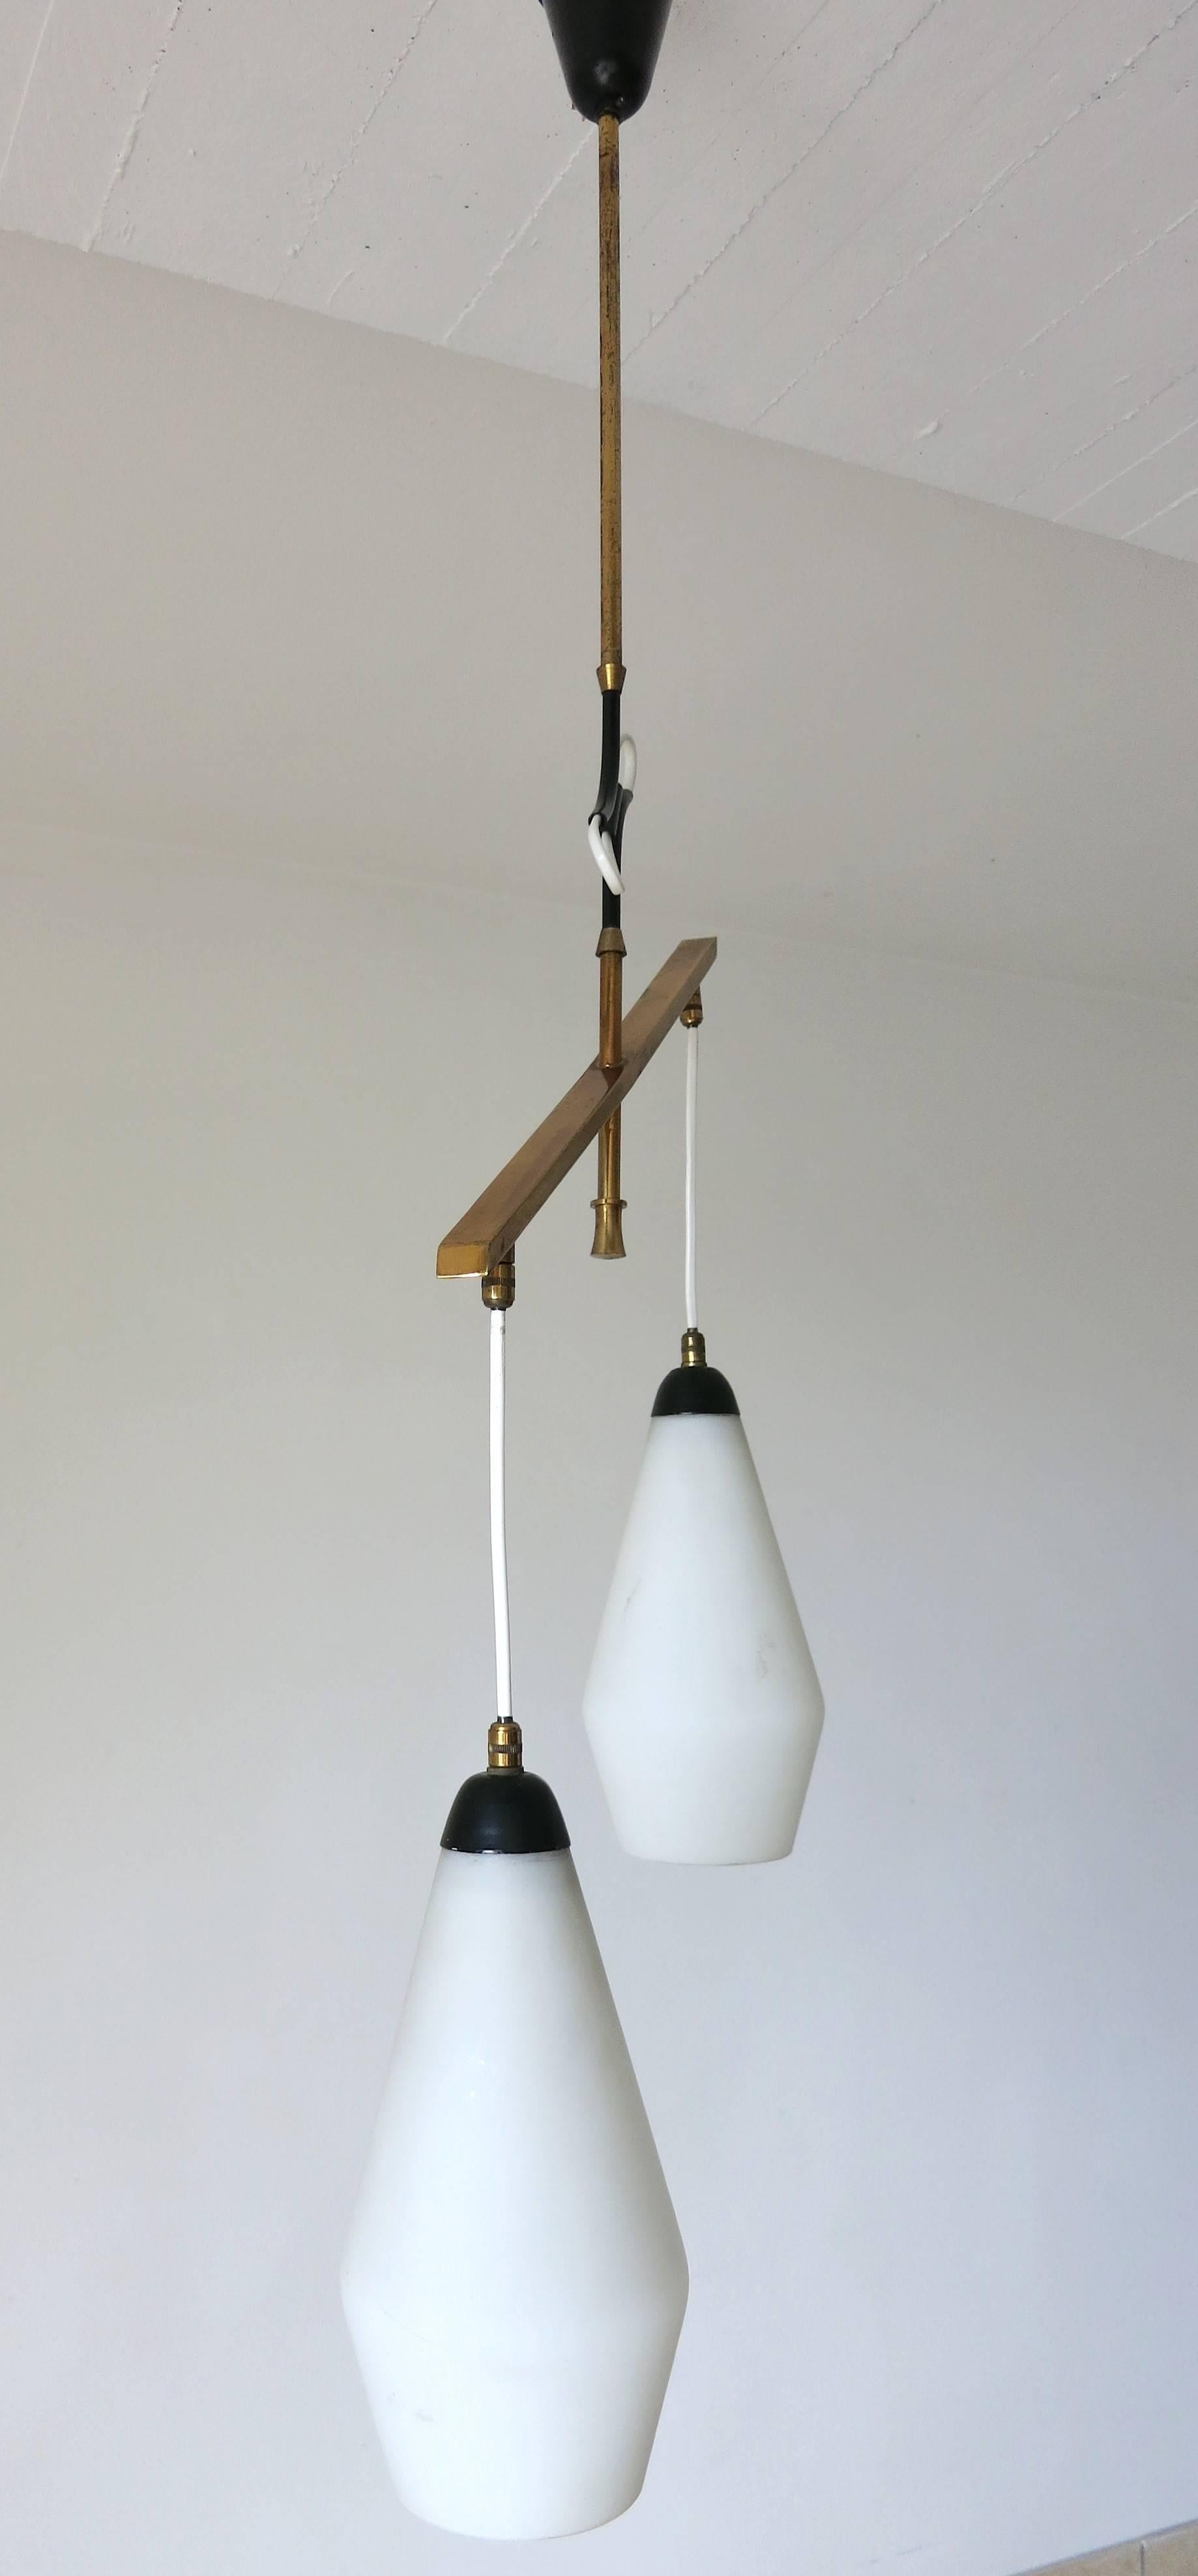 Italian vintage pendant with two matte white Murano glasses hand blown in to cylindrical shape, mounted on brass frame and black enameled details / Designed by Stilnovo circa 1960’s / Made in Italy
2 lights / E12 or E14 type / max 40W each
Width: